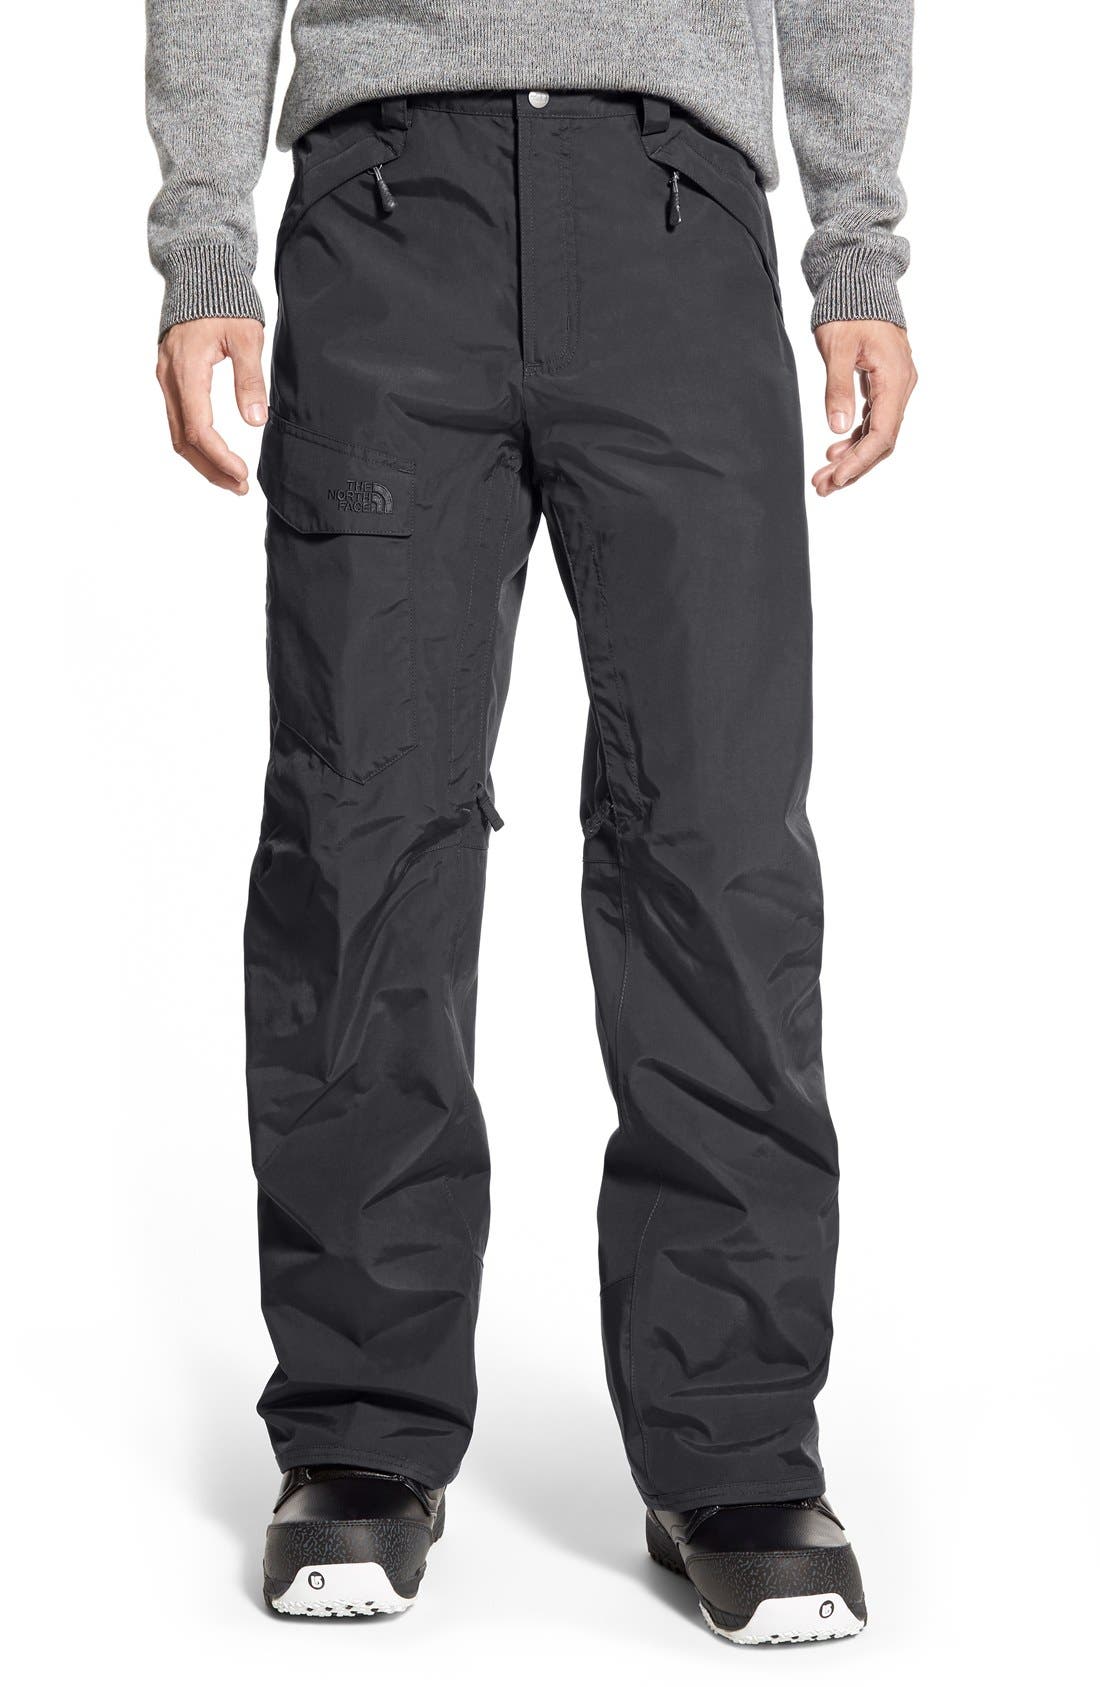 north face hyvent snowboard pants